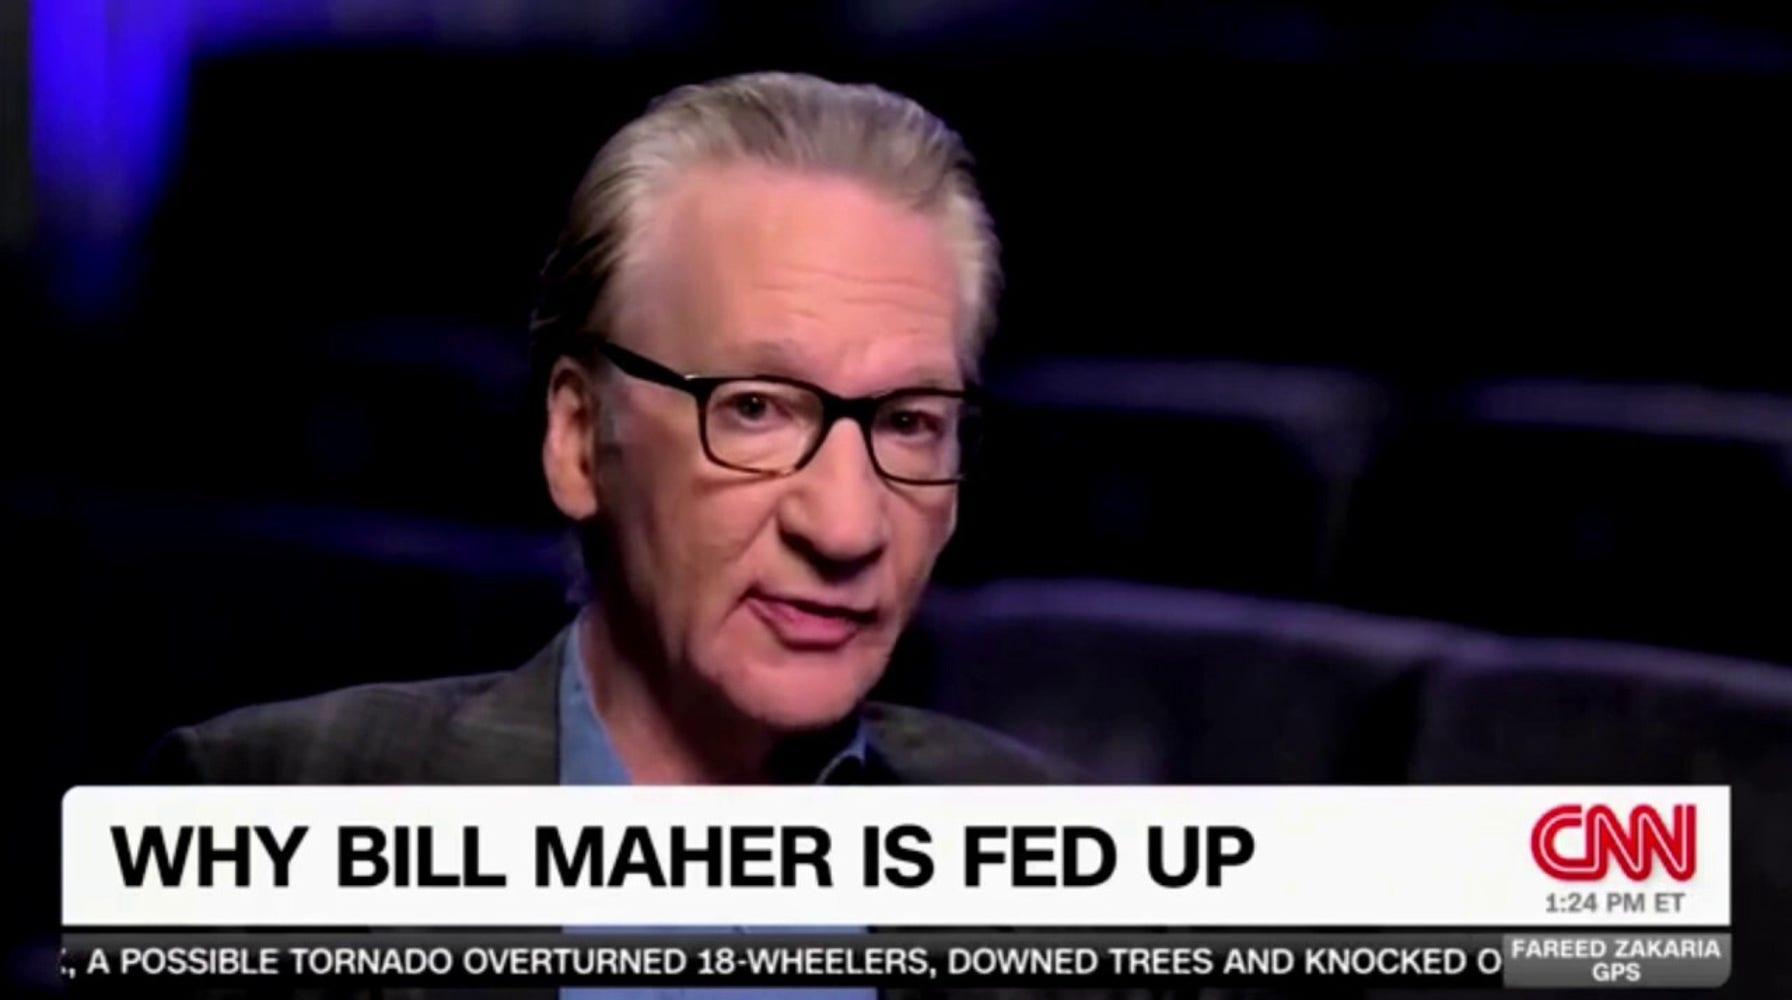 Bill Maher Defends His Criticism of the Left, Accuses Them of Deviating from Common Sense